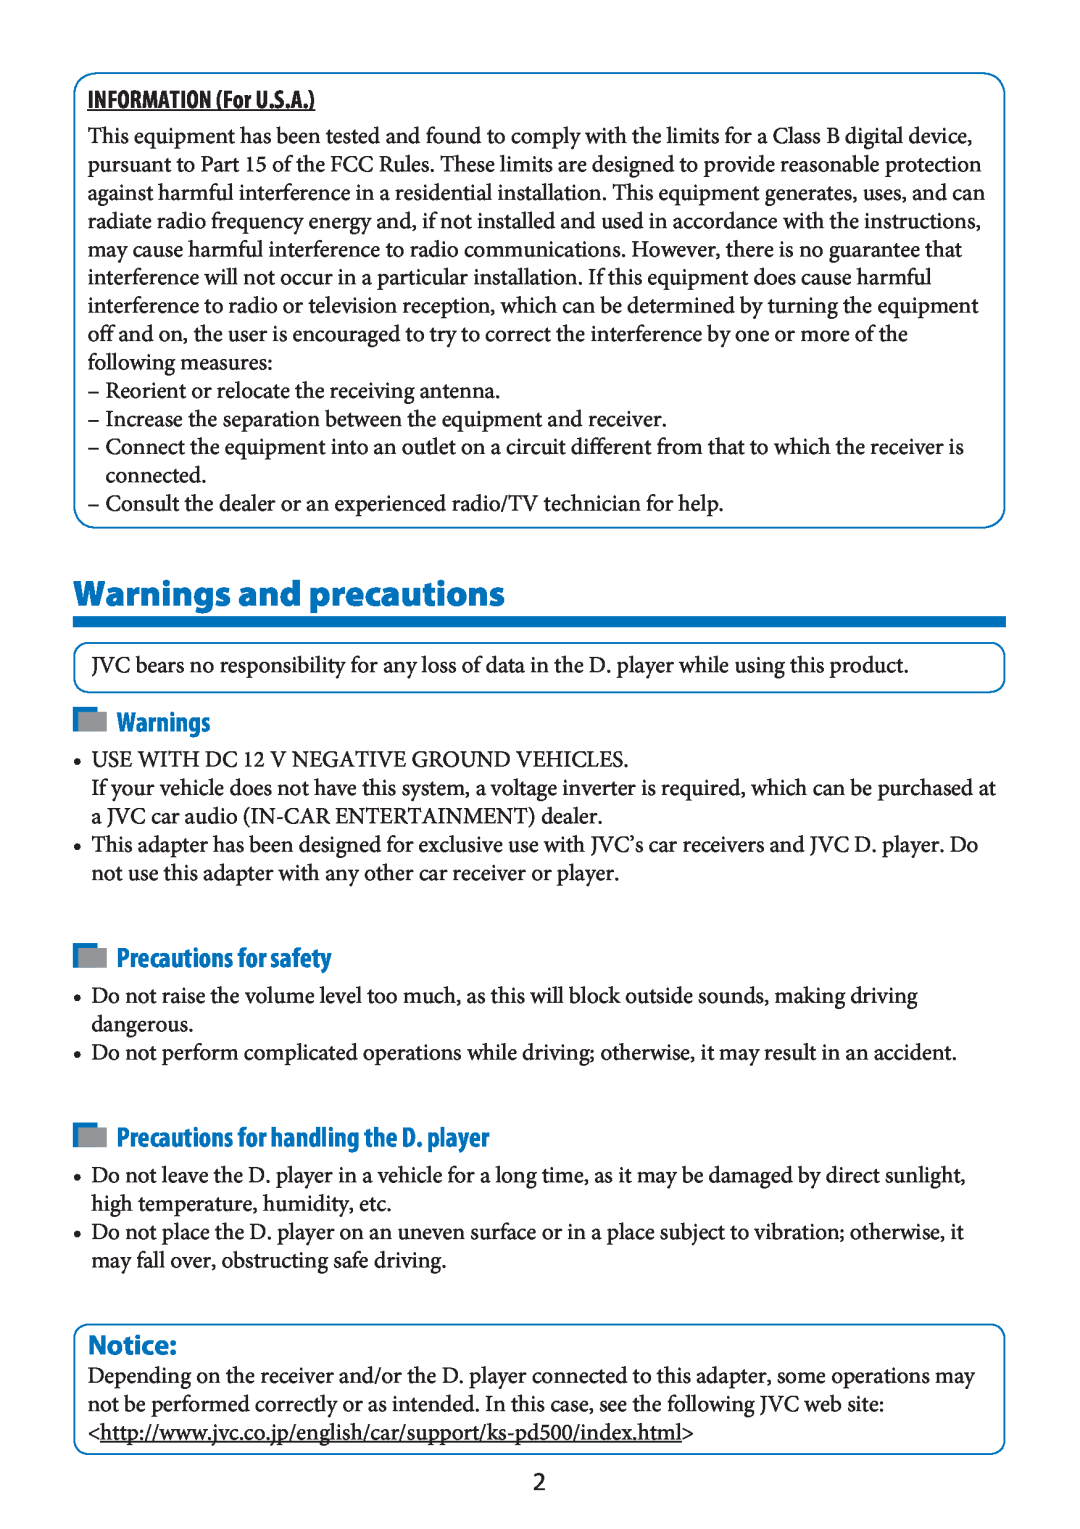 JVC KS-PD100 manual Precautions for handling the D. player, Warnings and precautions, Precautions for safety 